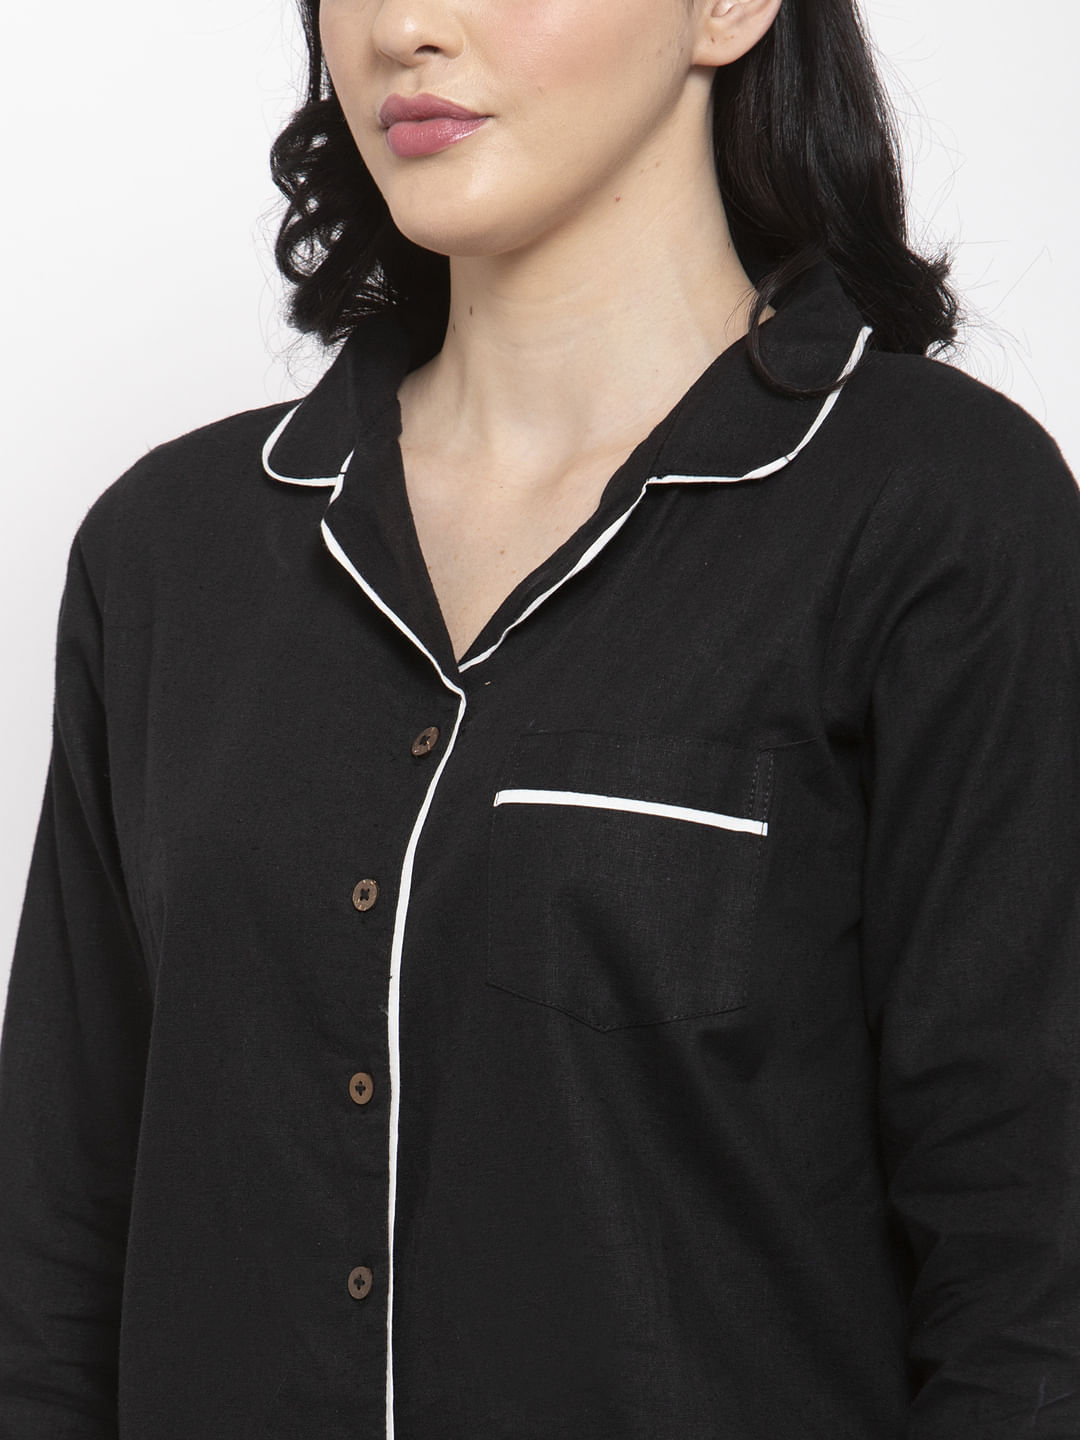 Black Cotton Solid Nightsuit